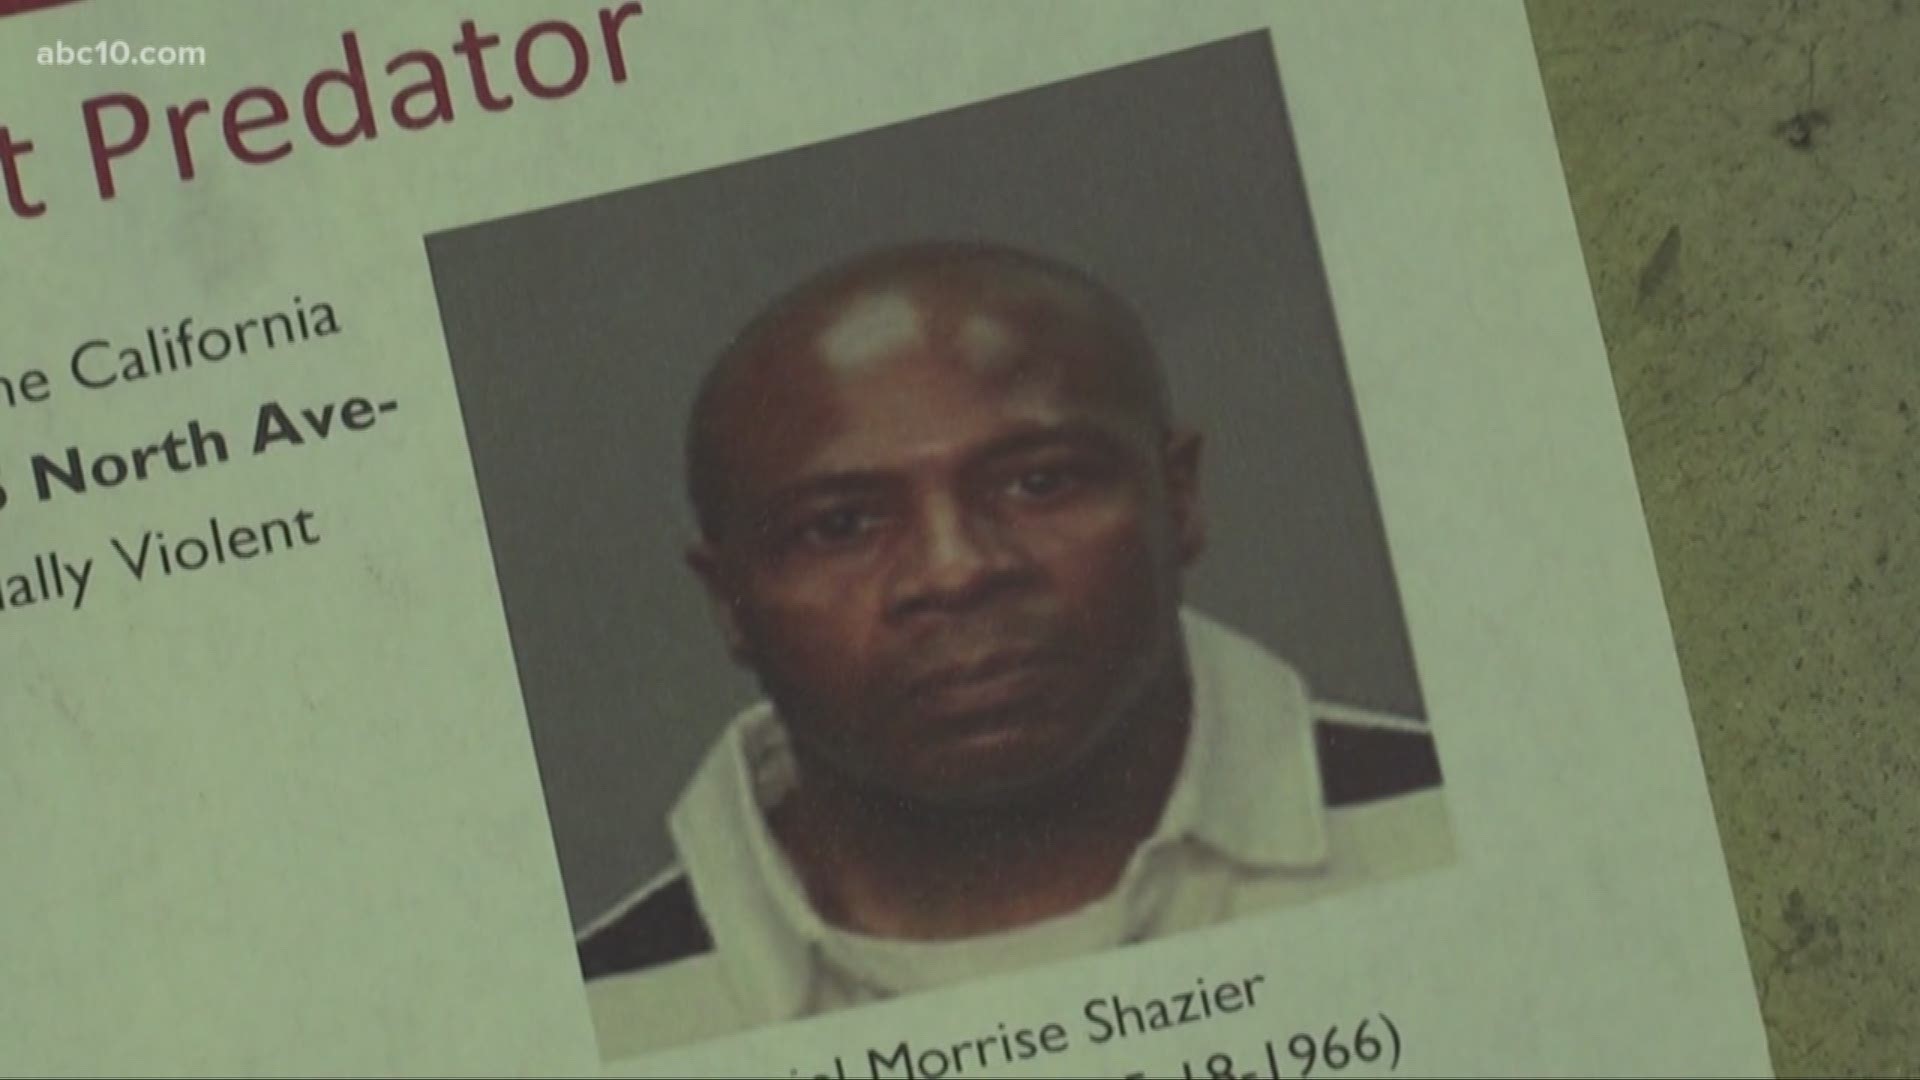 Dariel Shazier, a registered sexually violent predator, will be released from a state hospital and into a North Sacramento neighborhood.